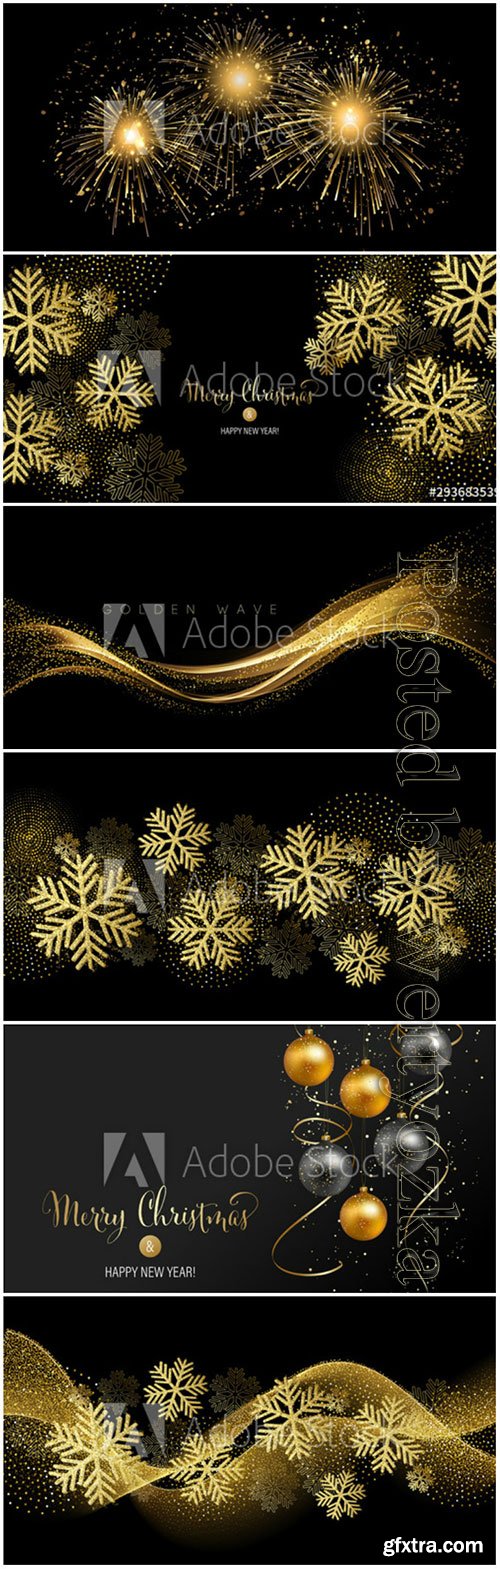 Snowflakes, salutes, Christmas balls on black vector backgrounds